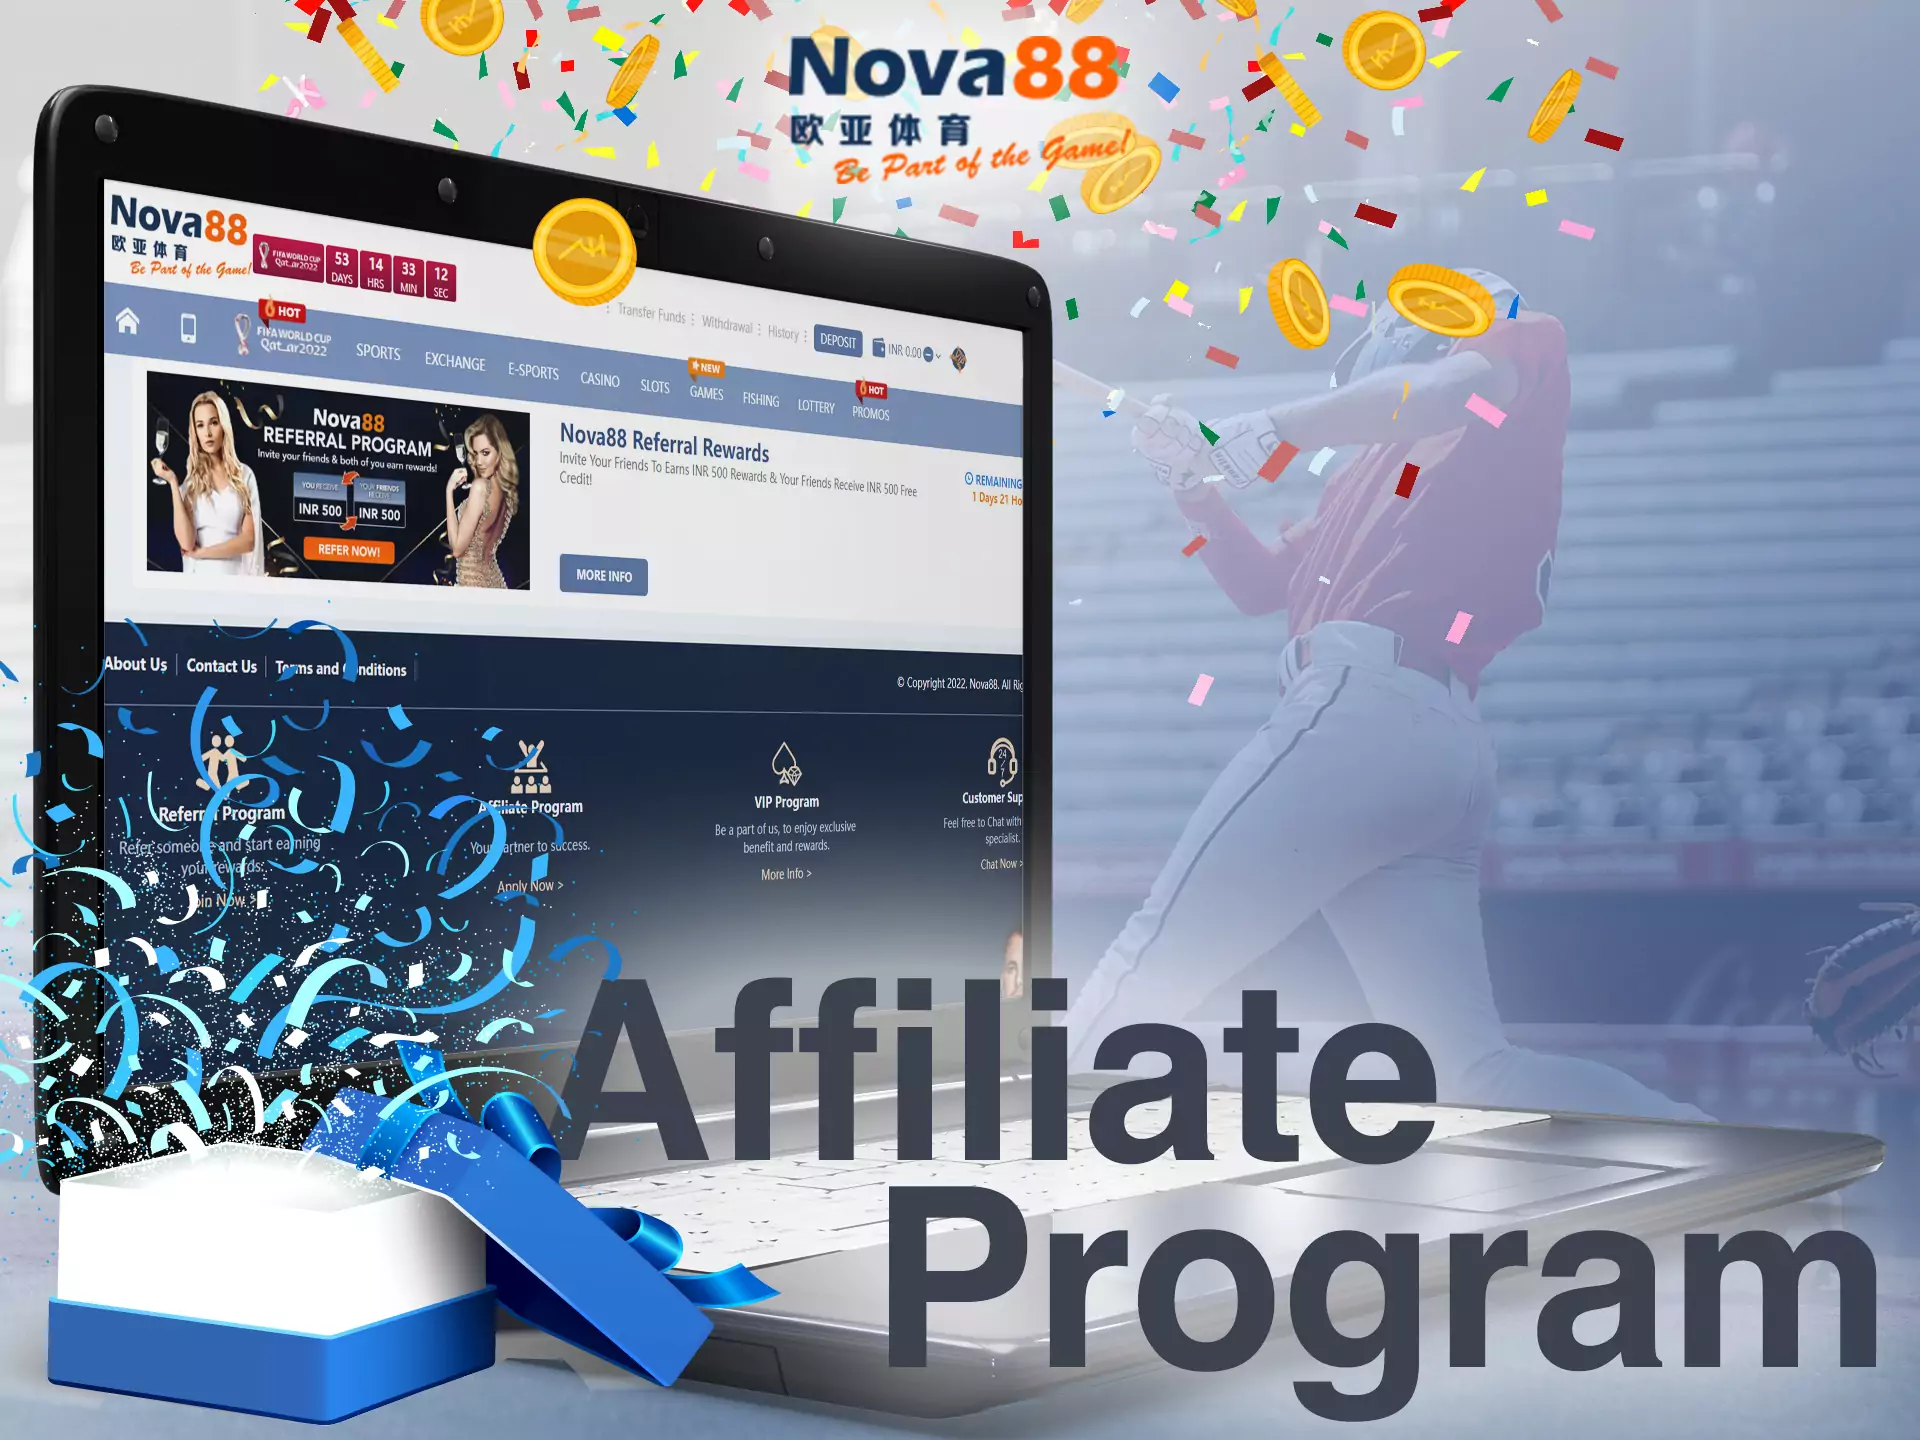 On Nova88, you can join the affiliate program to make your profit even more.